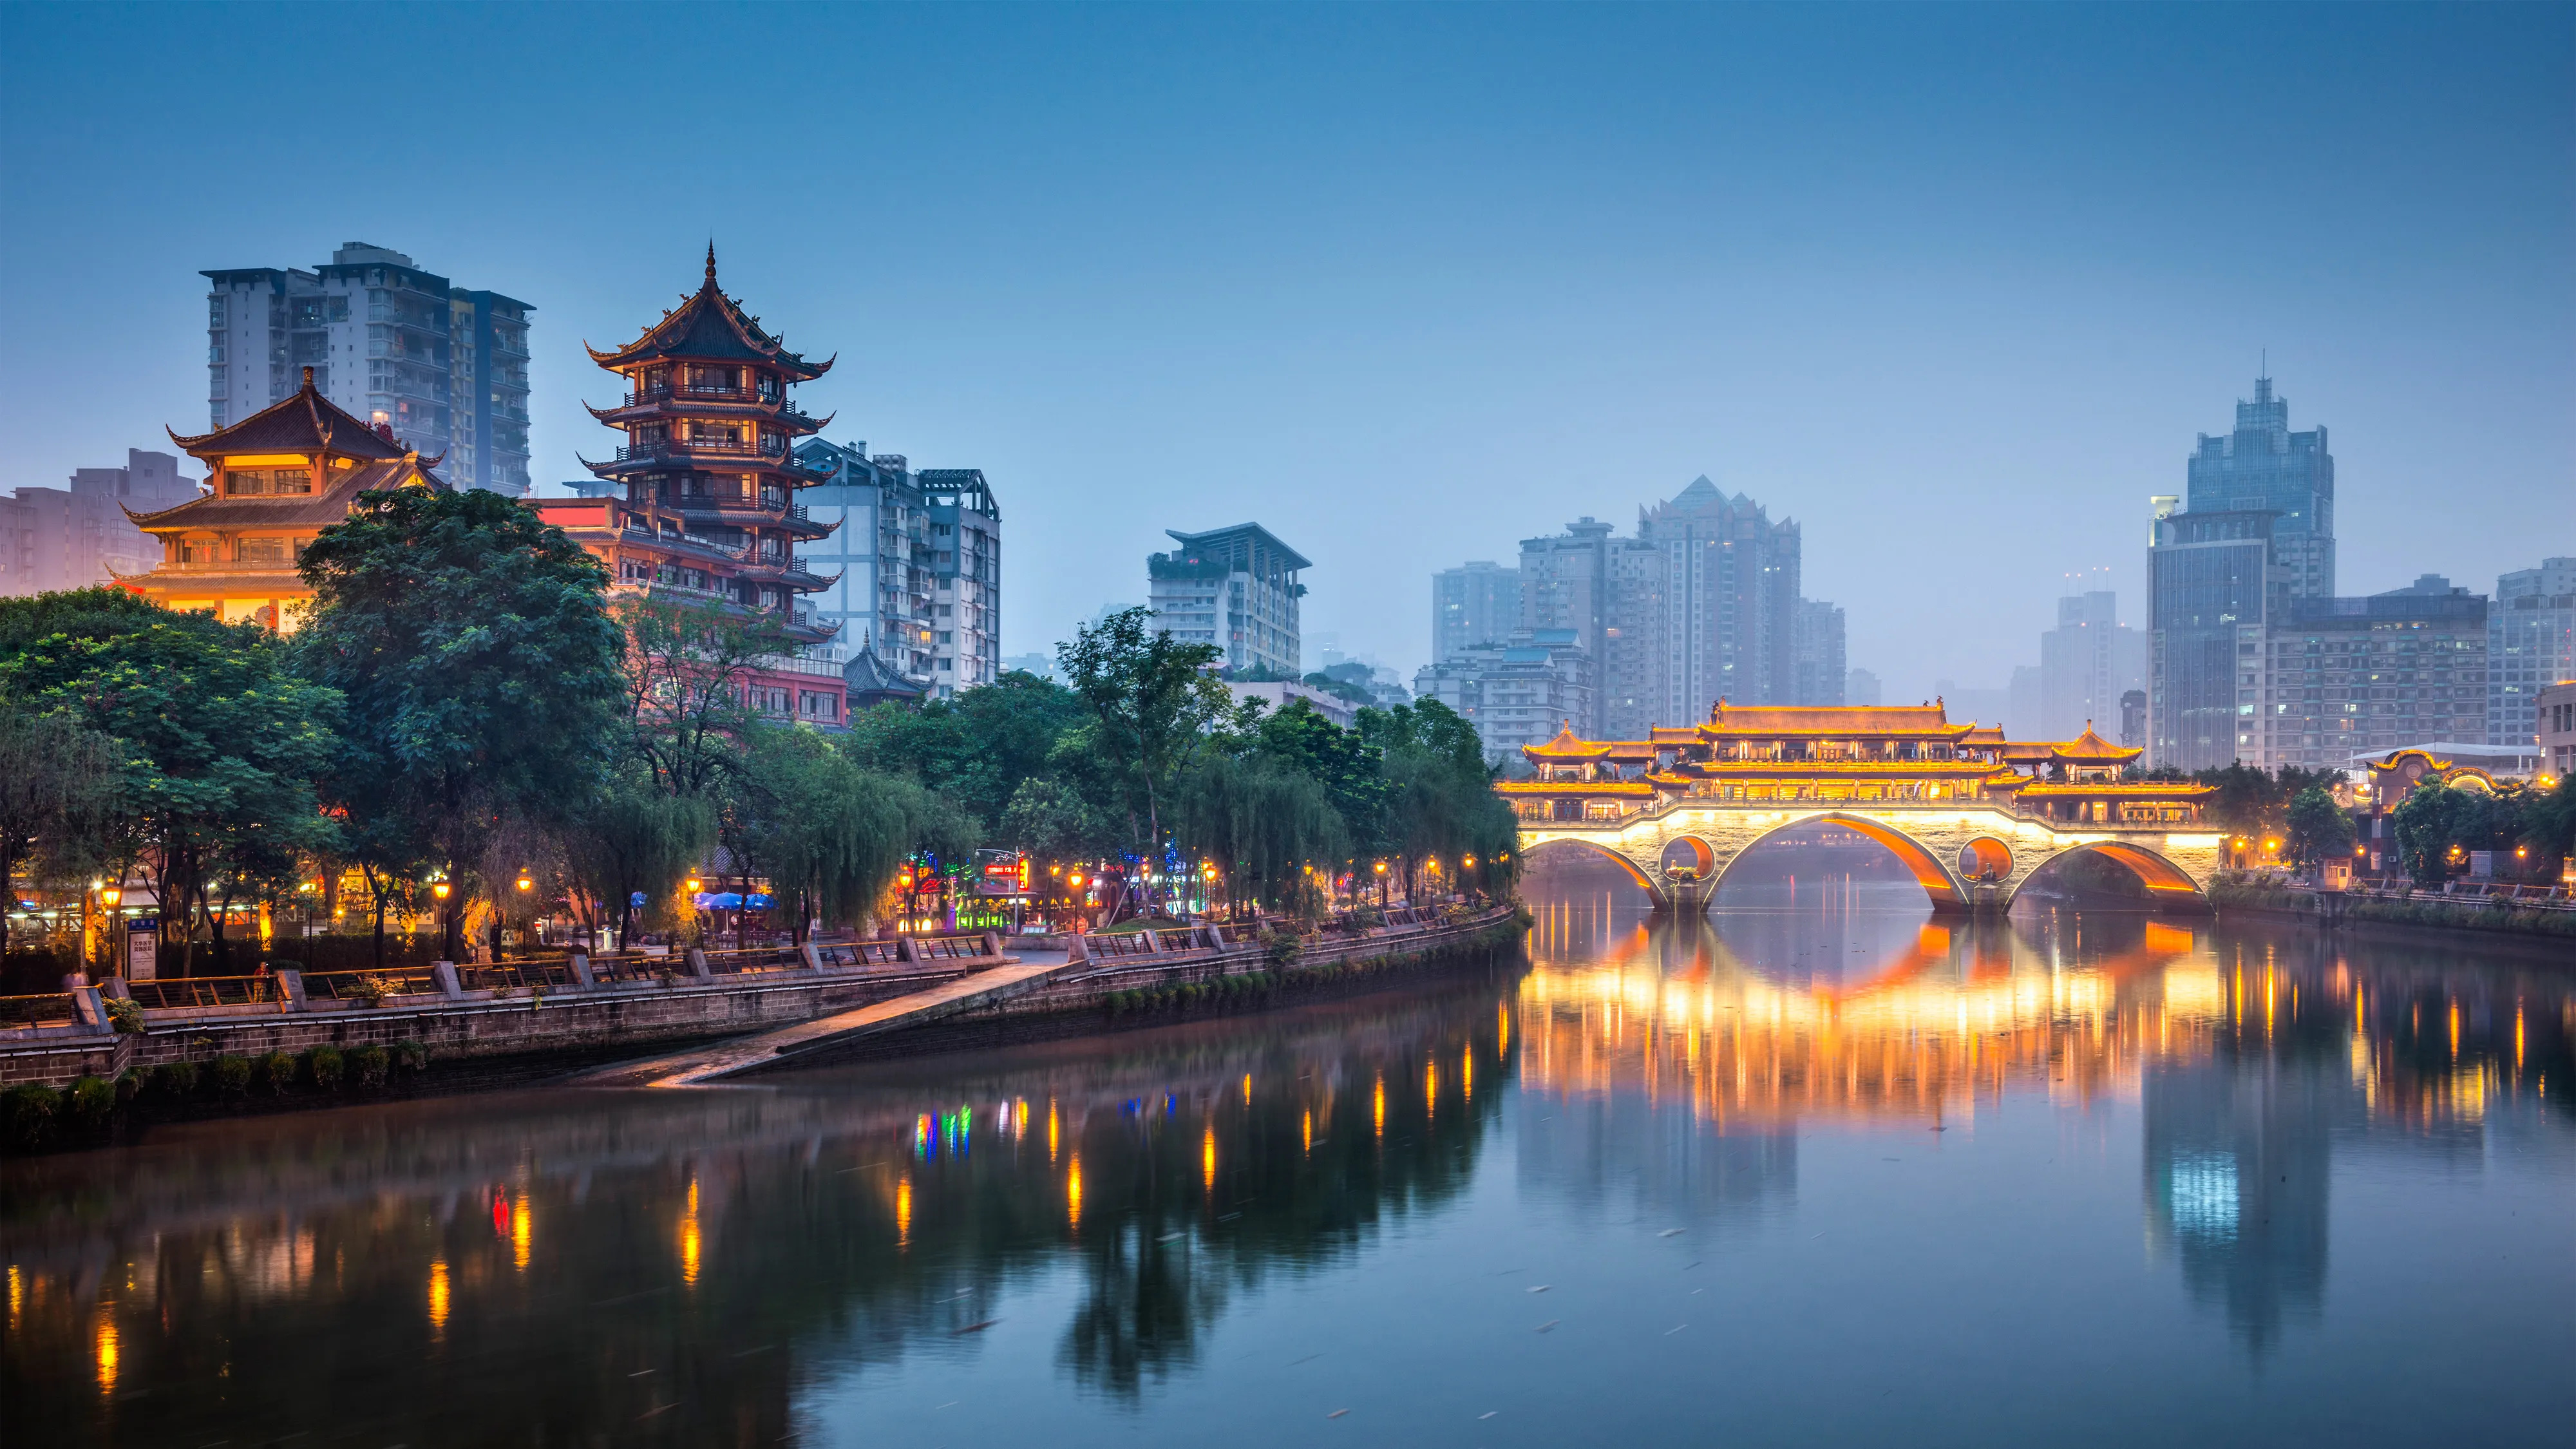 35 Facts about Chengdu - Facts.net